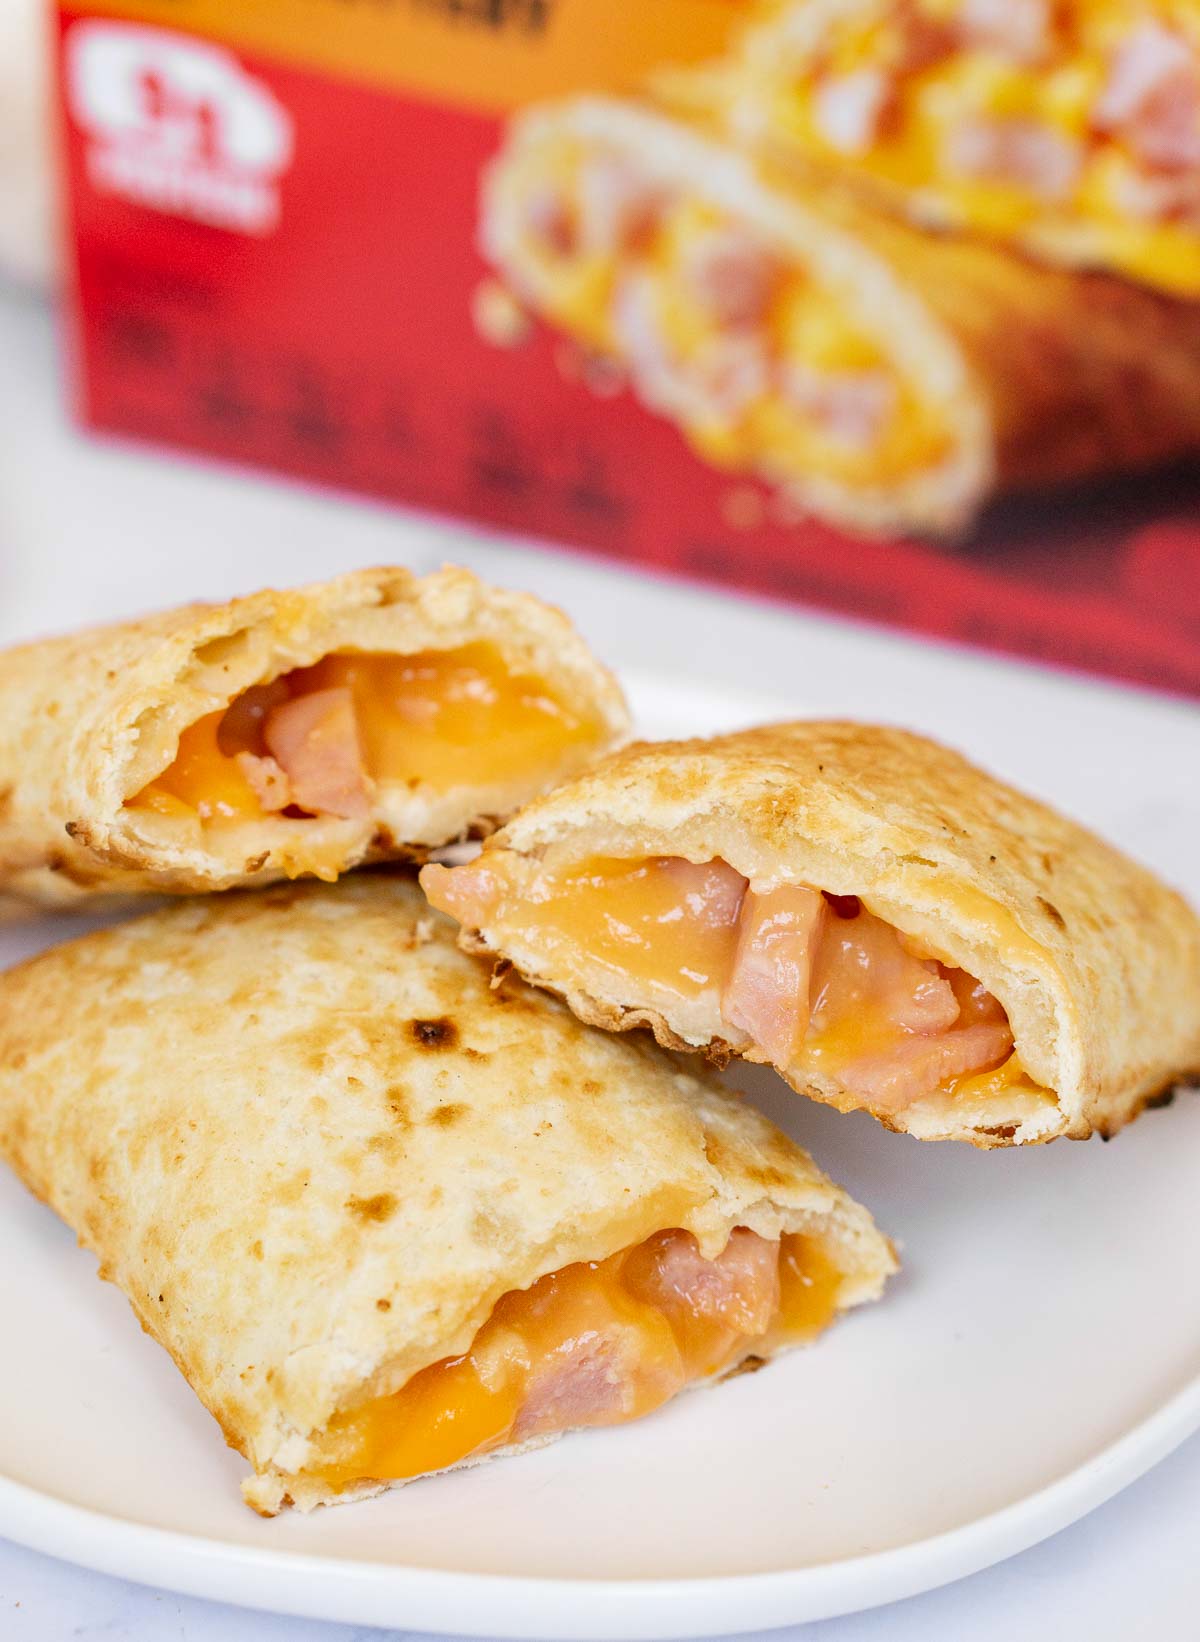 Hot pockets cooked in the air fryer on a plate with the box behind it.